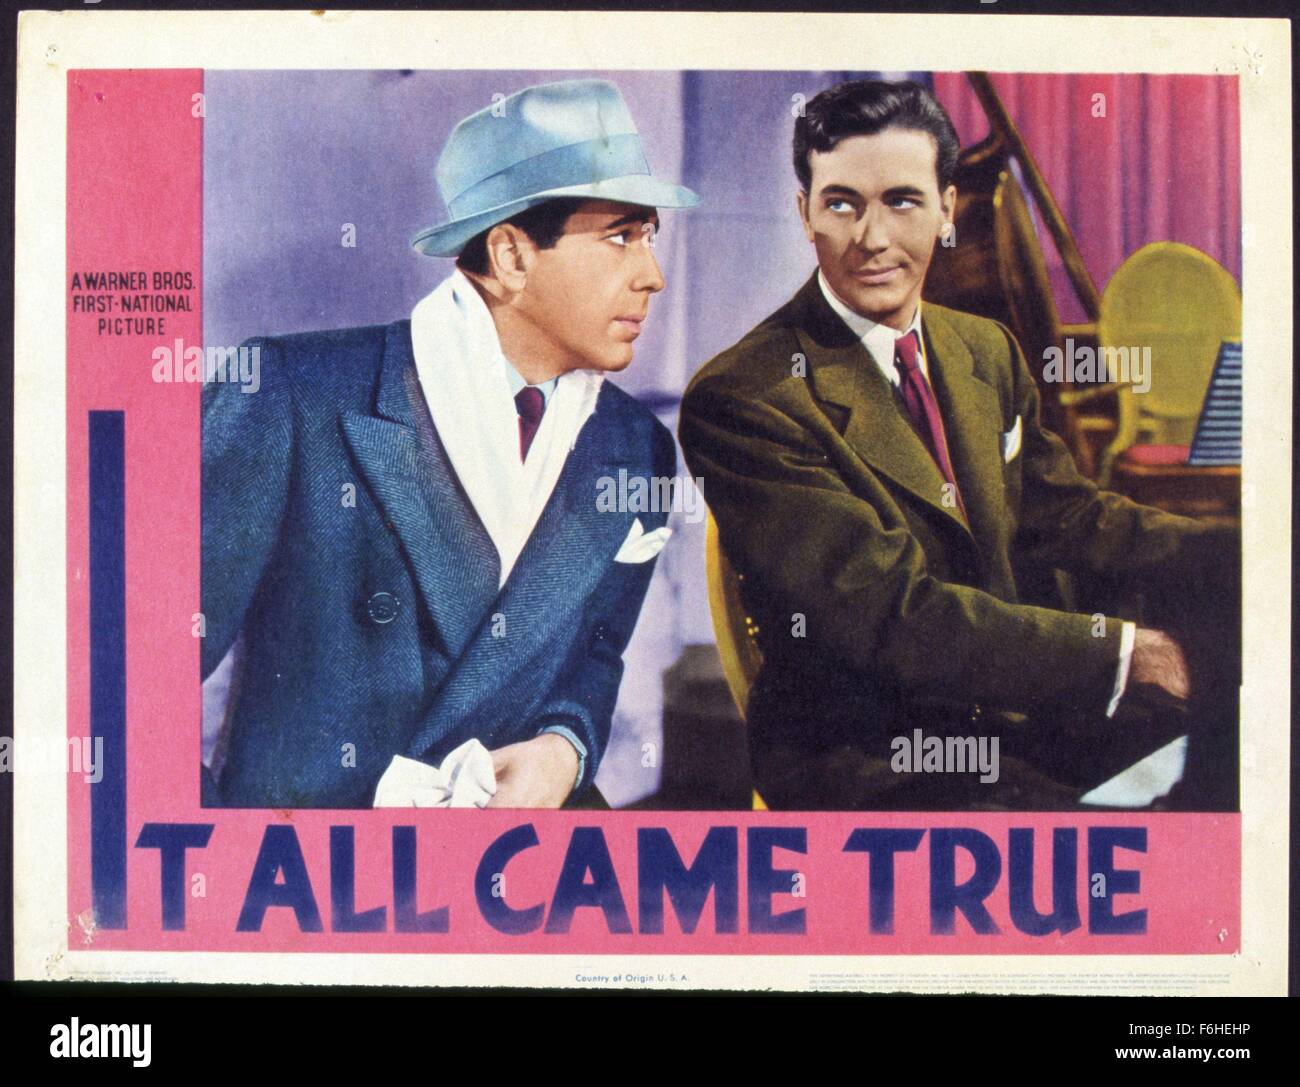 1940, Film Title: IT ALL CAME TRUE, Director: LEWIS SEILER, Studio: WARNER, Pictured: HUMPHREY BOGART, JEFFREY LYNN, CAMP, PIANO, PLAYING INSTRUMENT, HAT, SUIT. (Credit Image: SNAP) Stock Photo